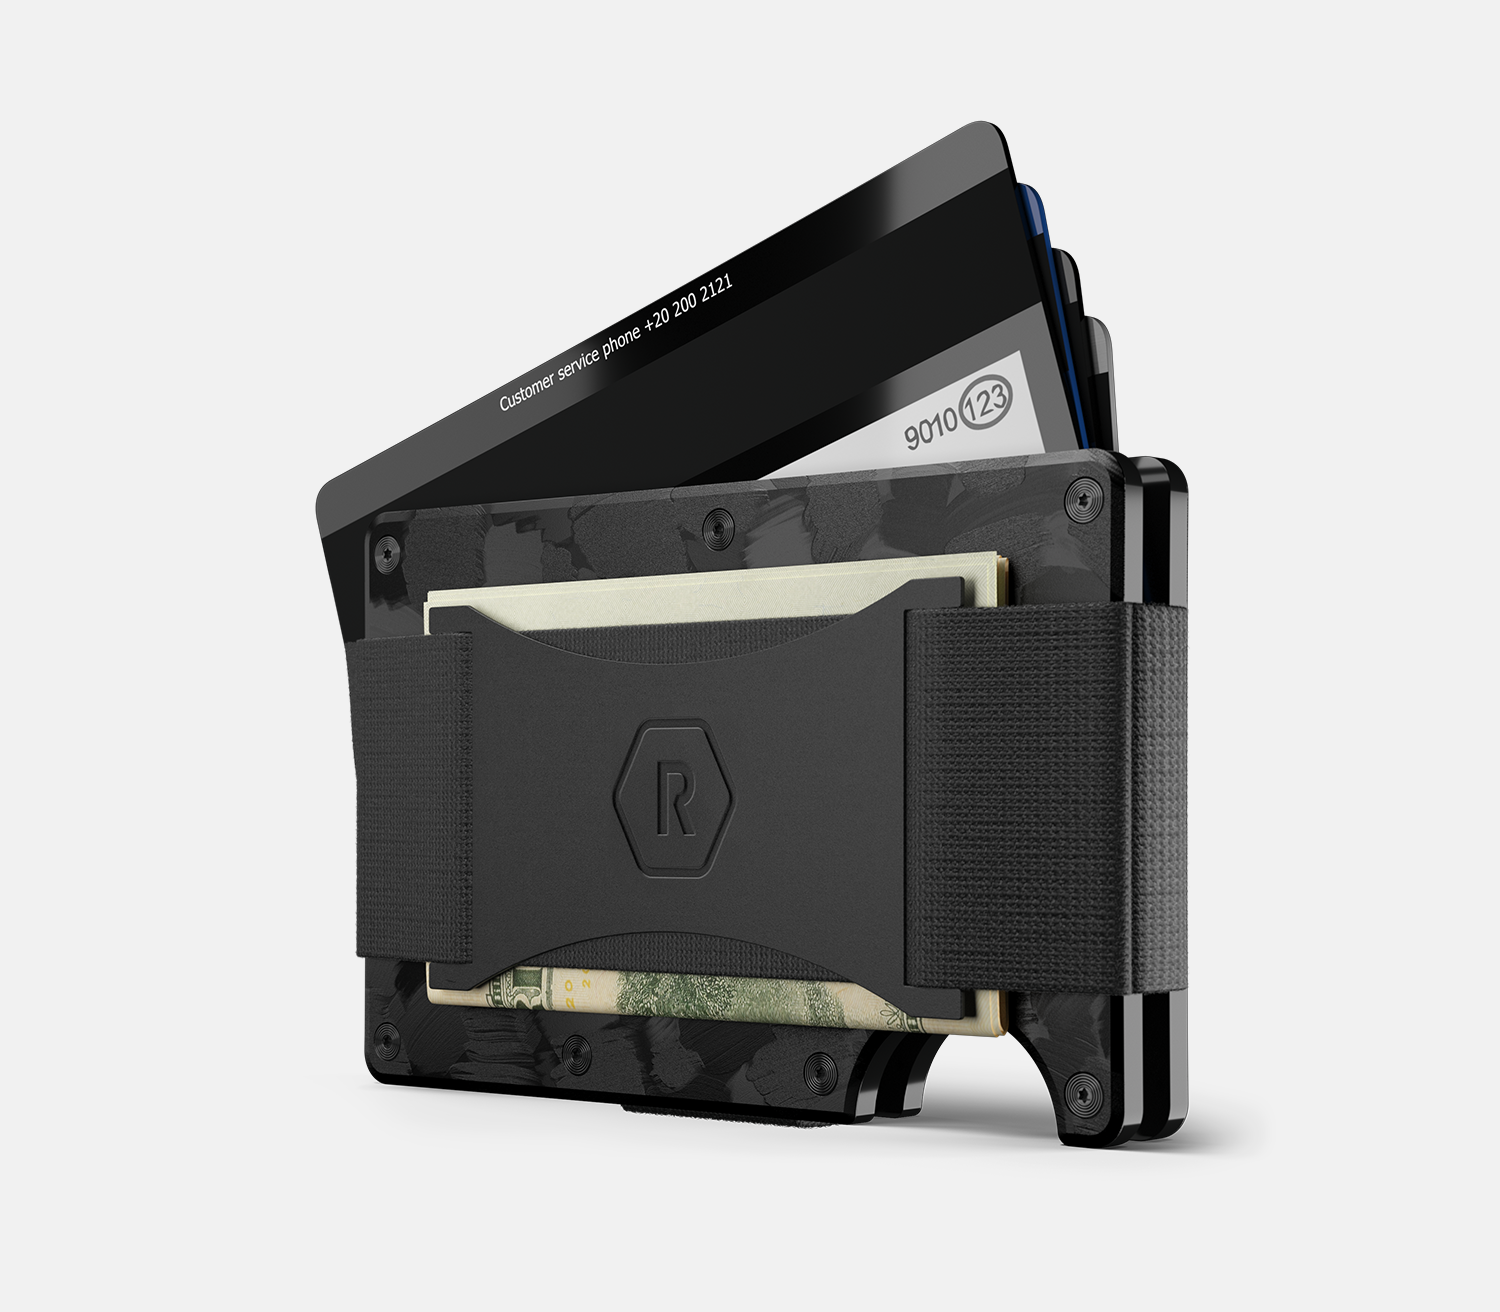 Is The Ridge Wallet Worth It? - Why It's One Of The Best Slim